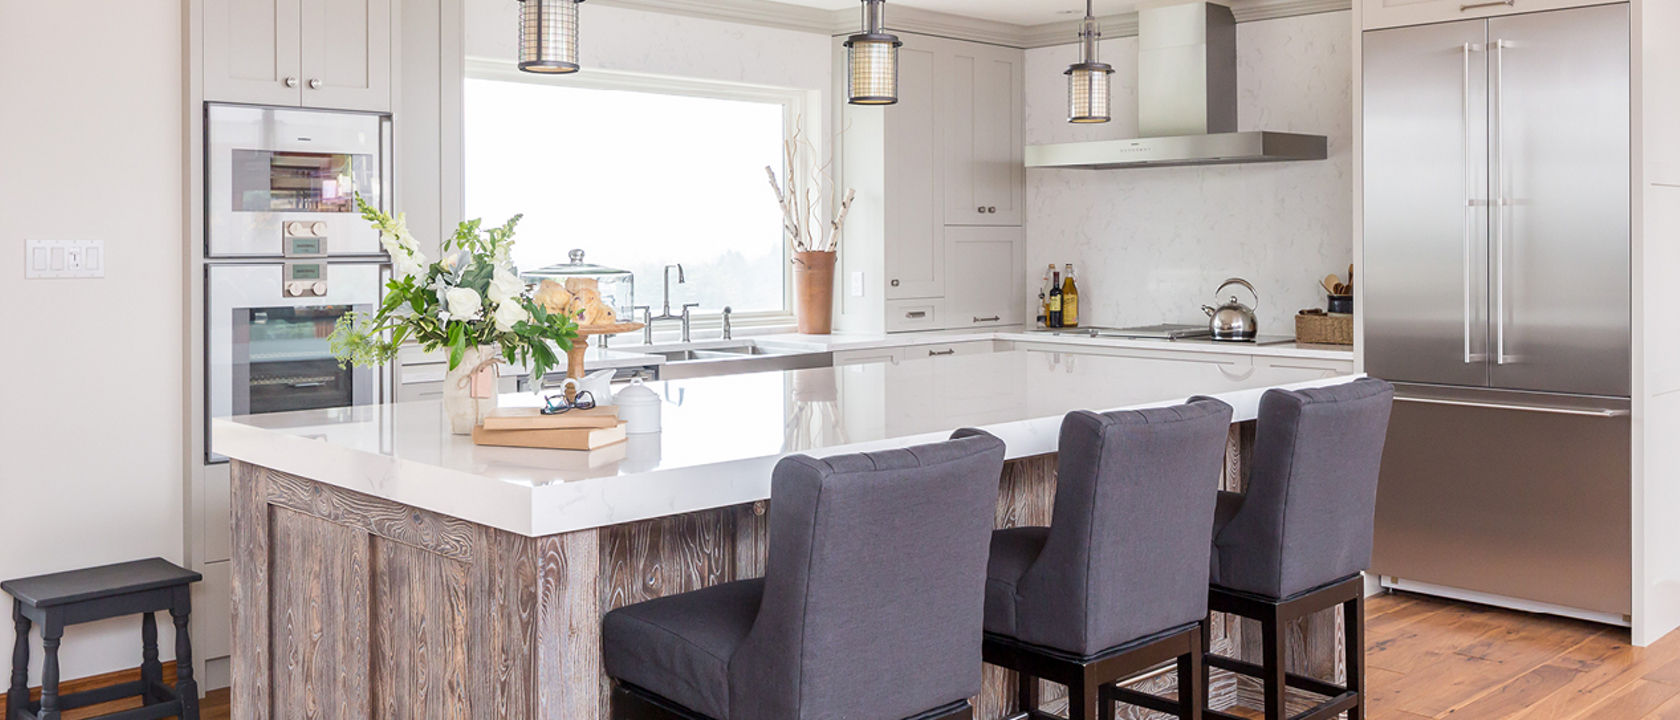 A gorgeous kitchen with a wooden island topped with Cambria Quartz Torquay countertops, three blue barstools, large window over the sink, and modern range.